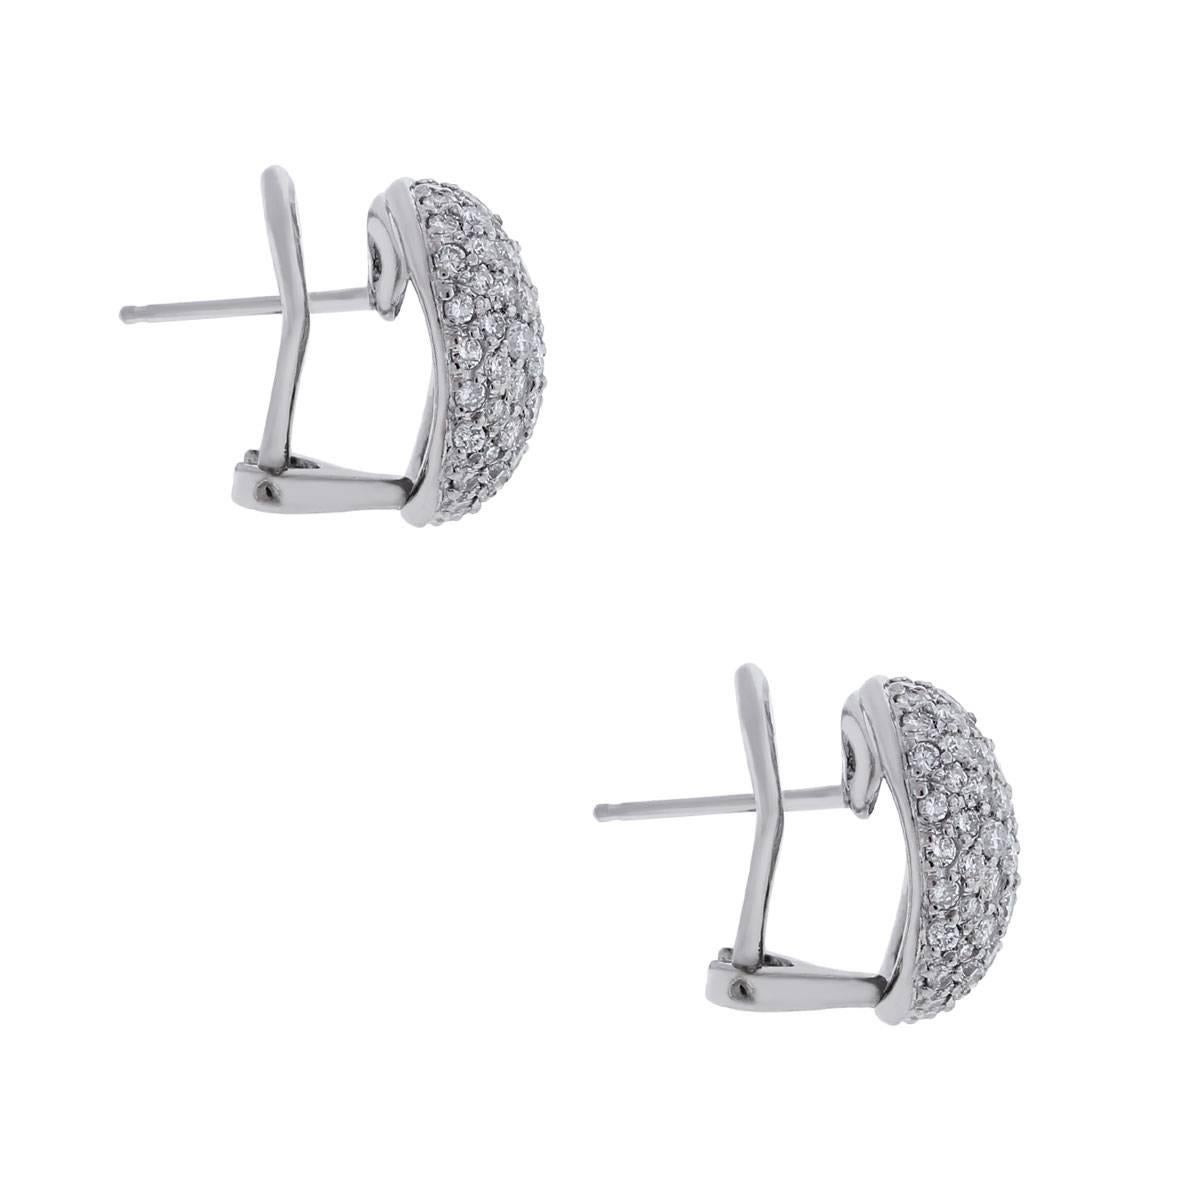 Style: Button Style Earrings
Material: 18k White Gold
Diamonds Details: Approximately 2ctw Pave Set Round Brilliant Diamonds. Diamonds are G/H in color and VS-SI in Clarity.
Measurements: 0.60